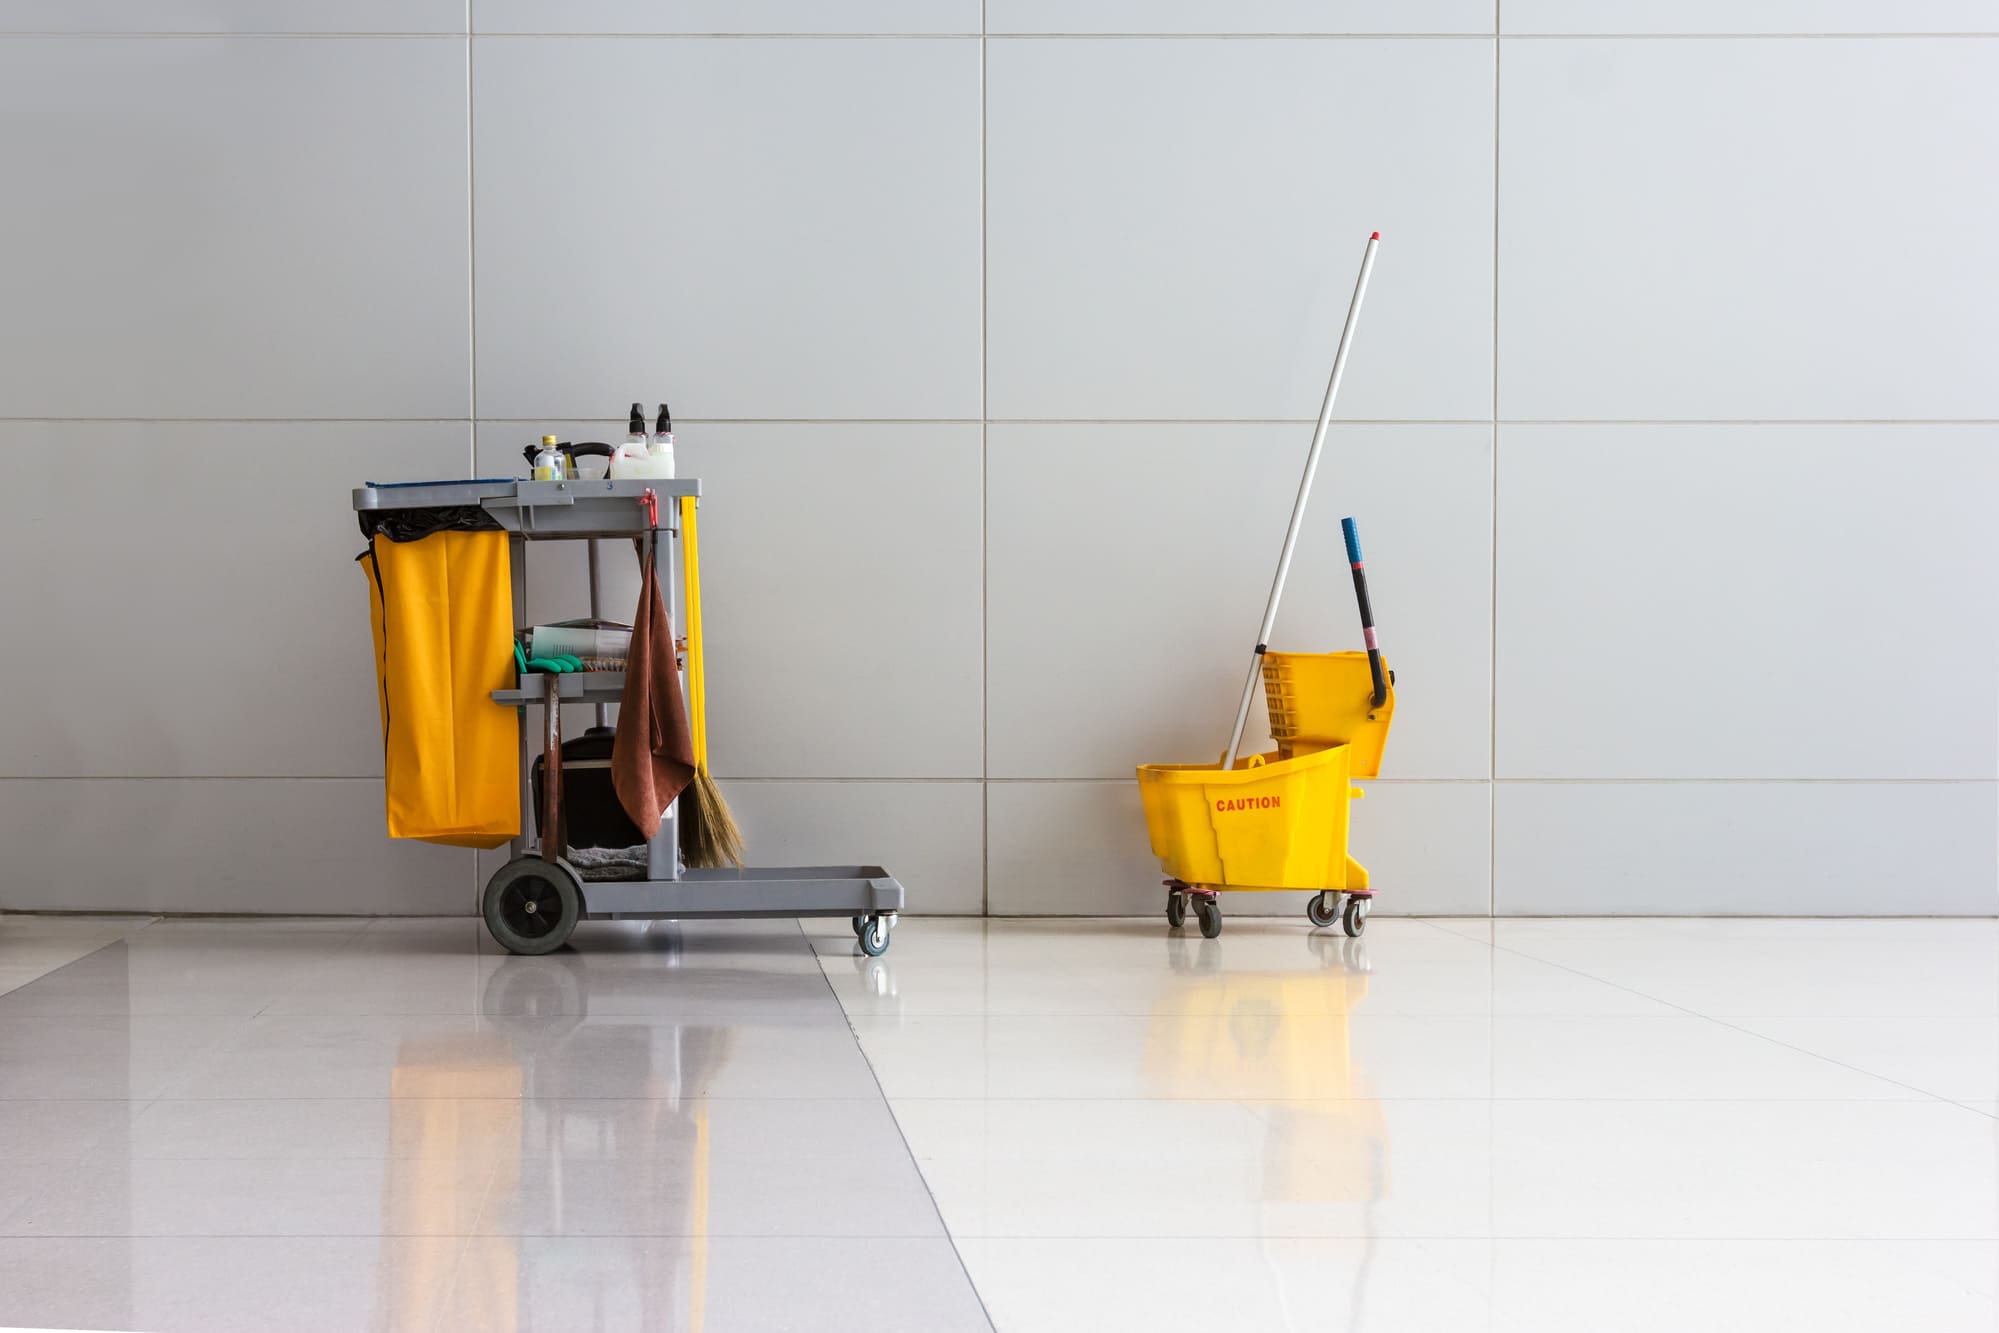 Janitorial Vs Commercial Cleaning – The Difference